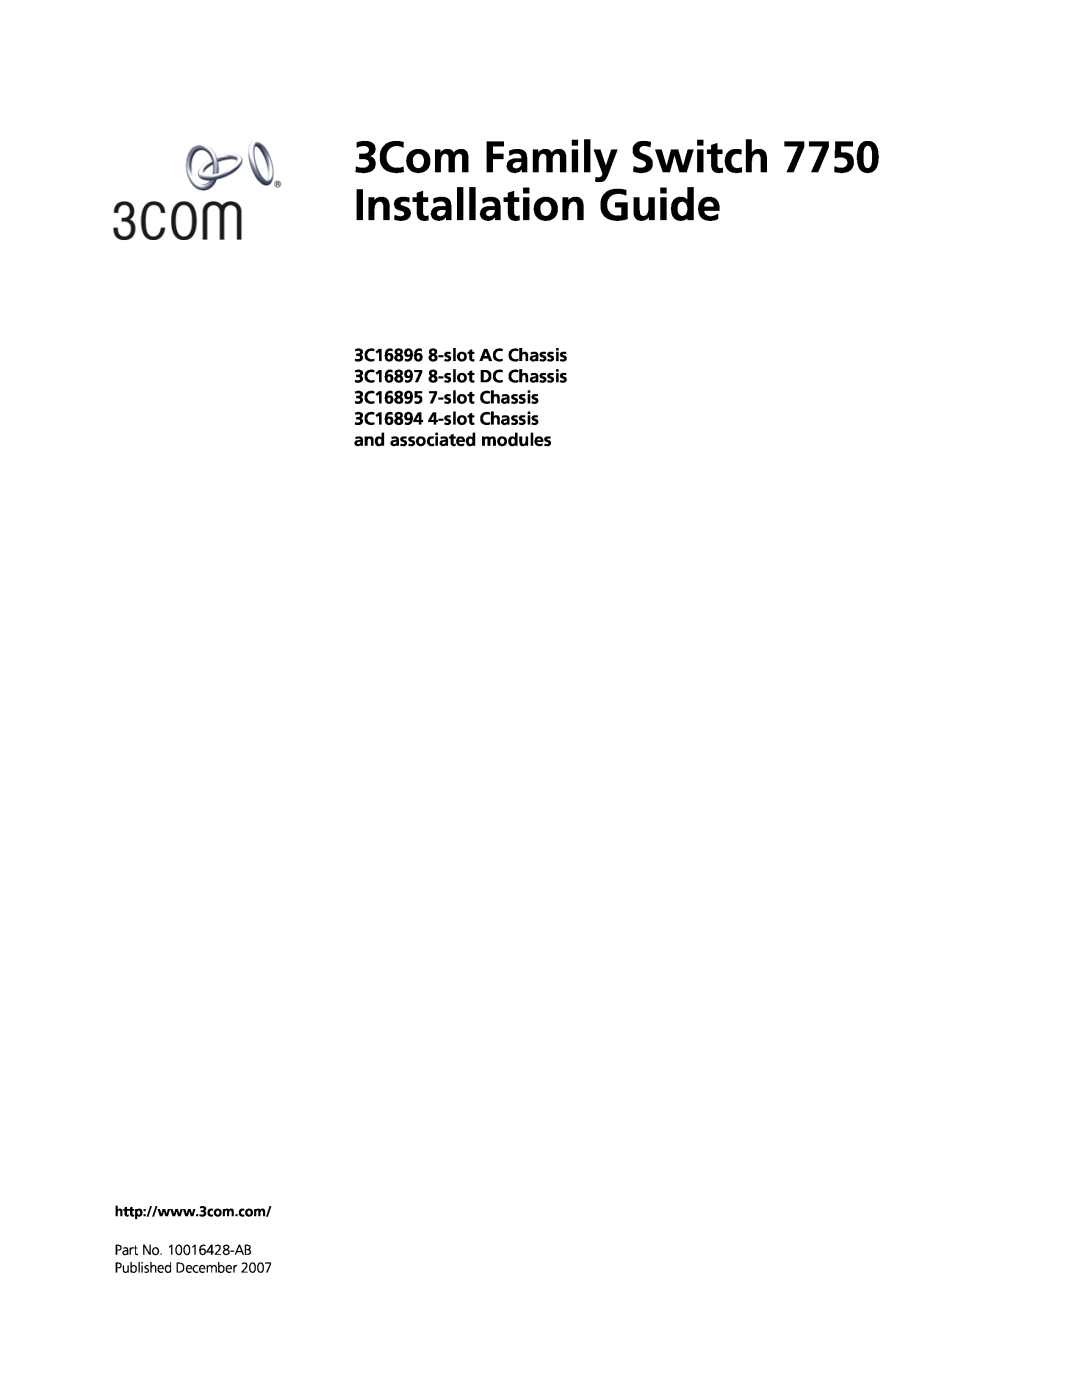 3Com 3C16894 4-slot Chassis, 3C16895 7-slot Chassis manual 3Com Family Switch 7750 Installation Guide 